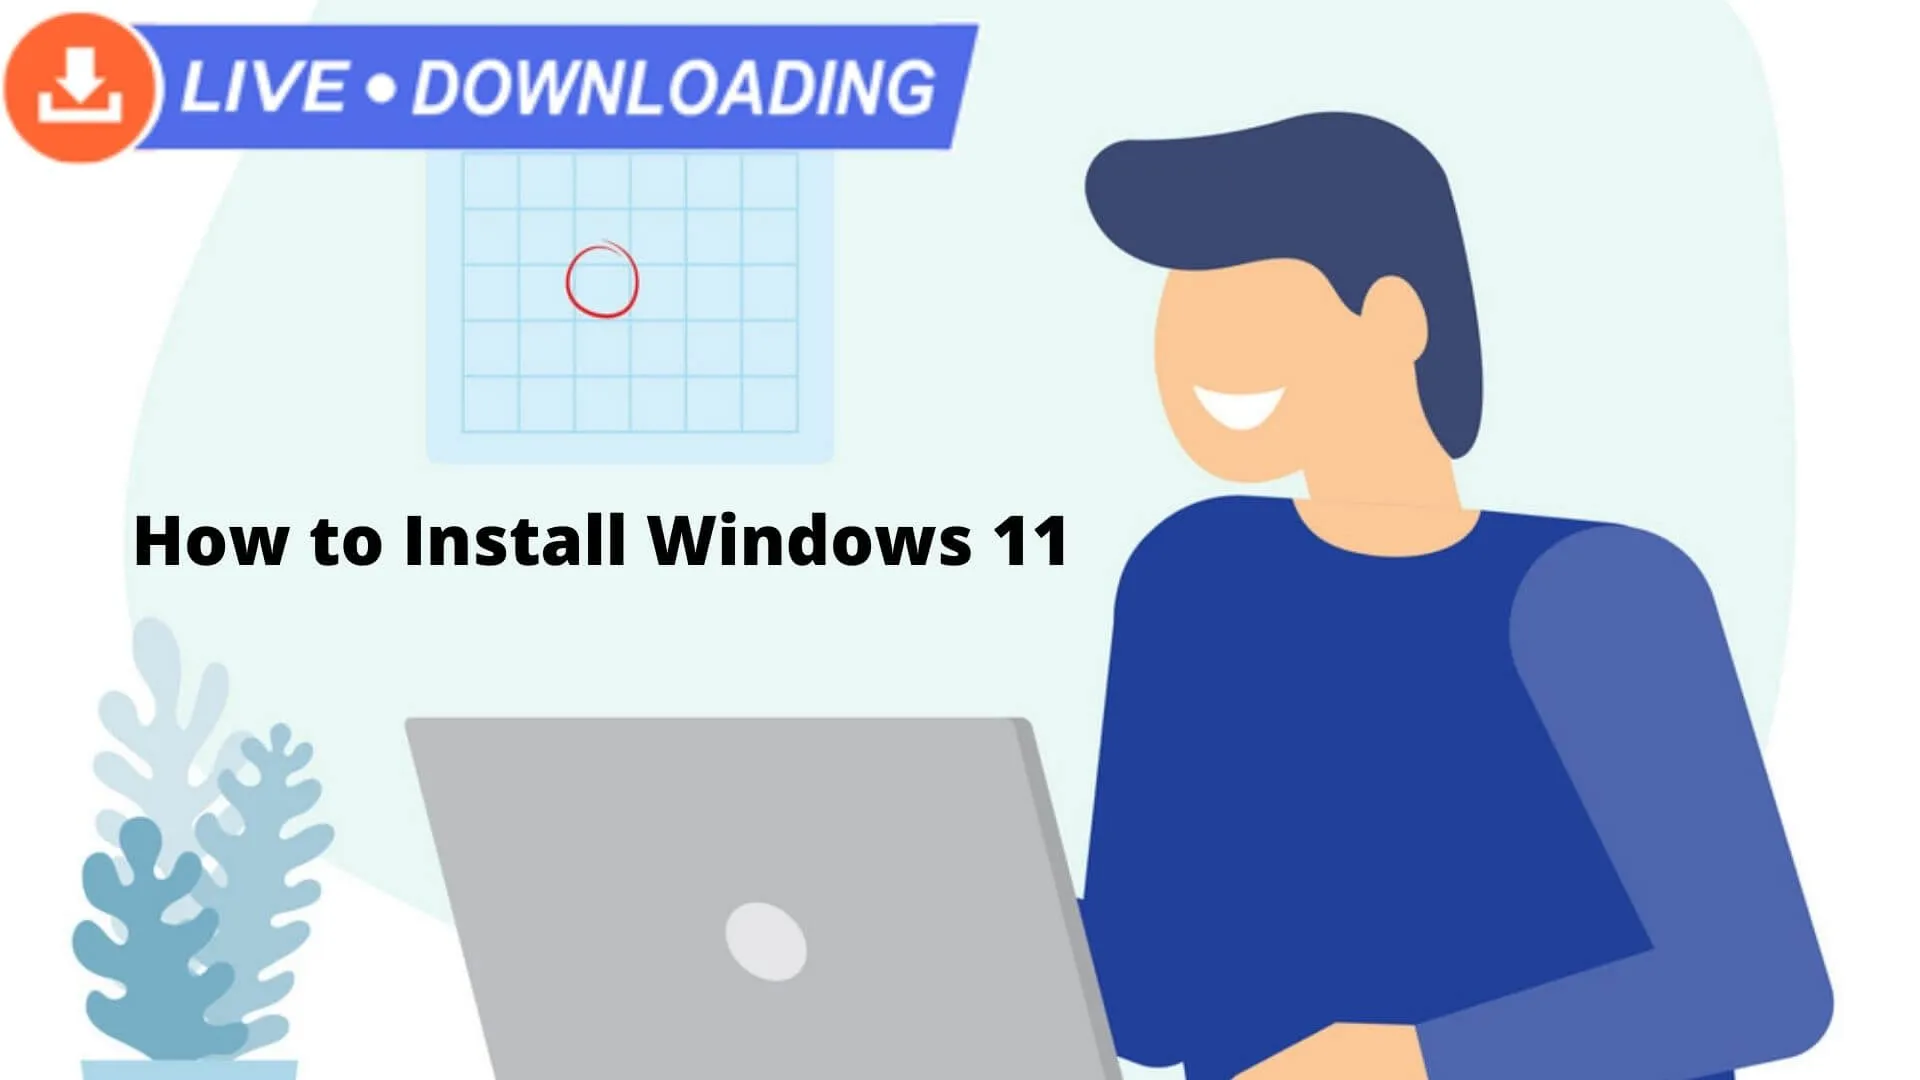 How to install Windows 11 on your PC?